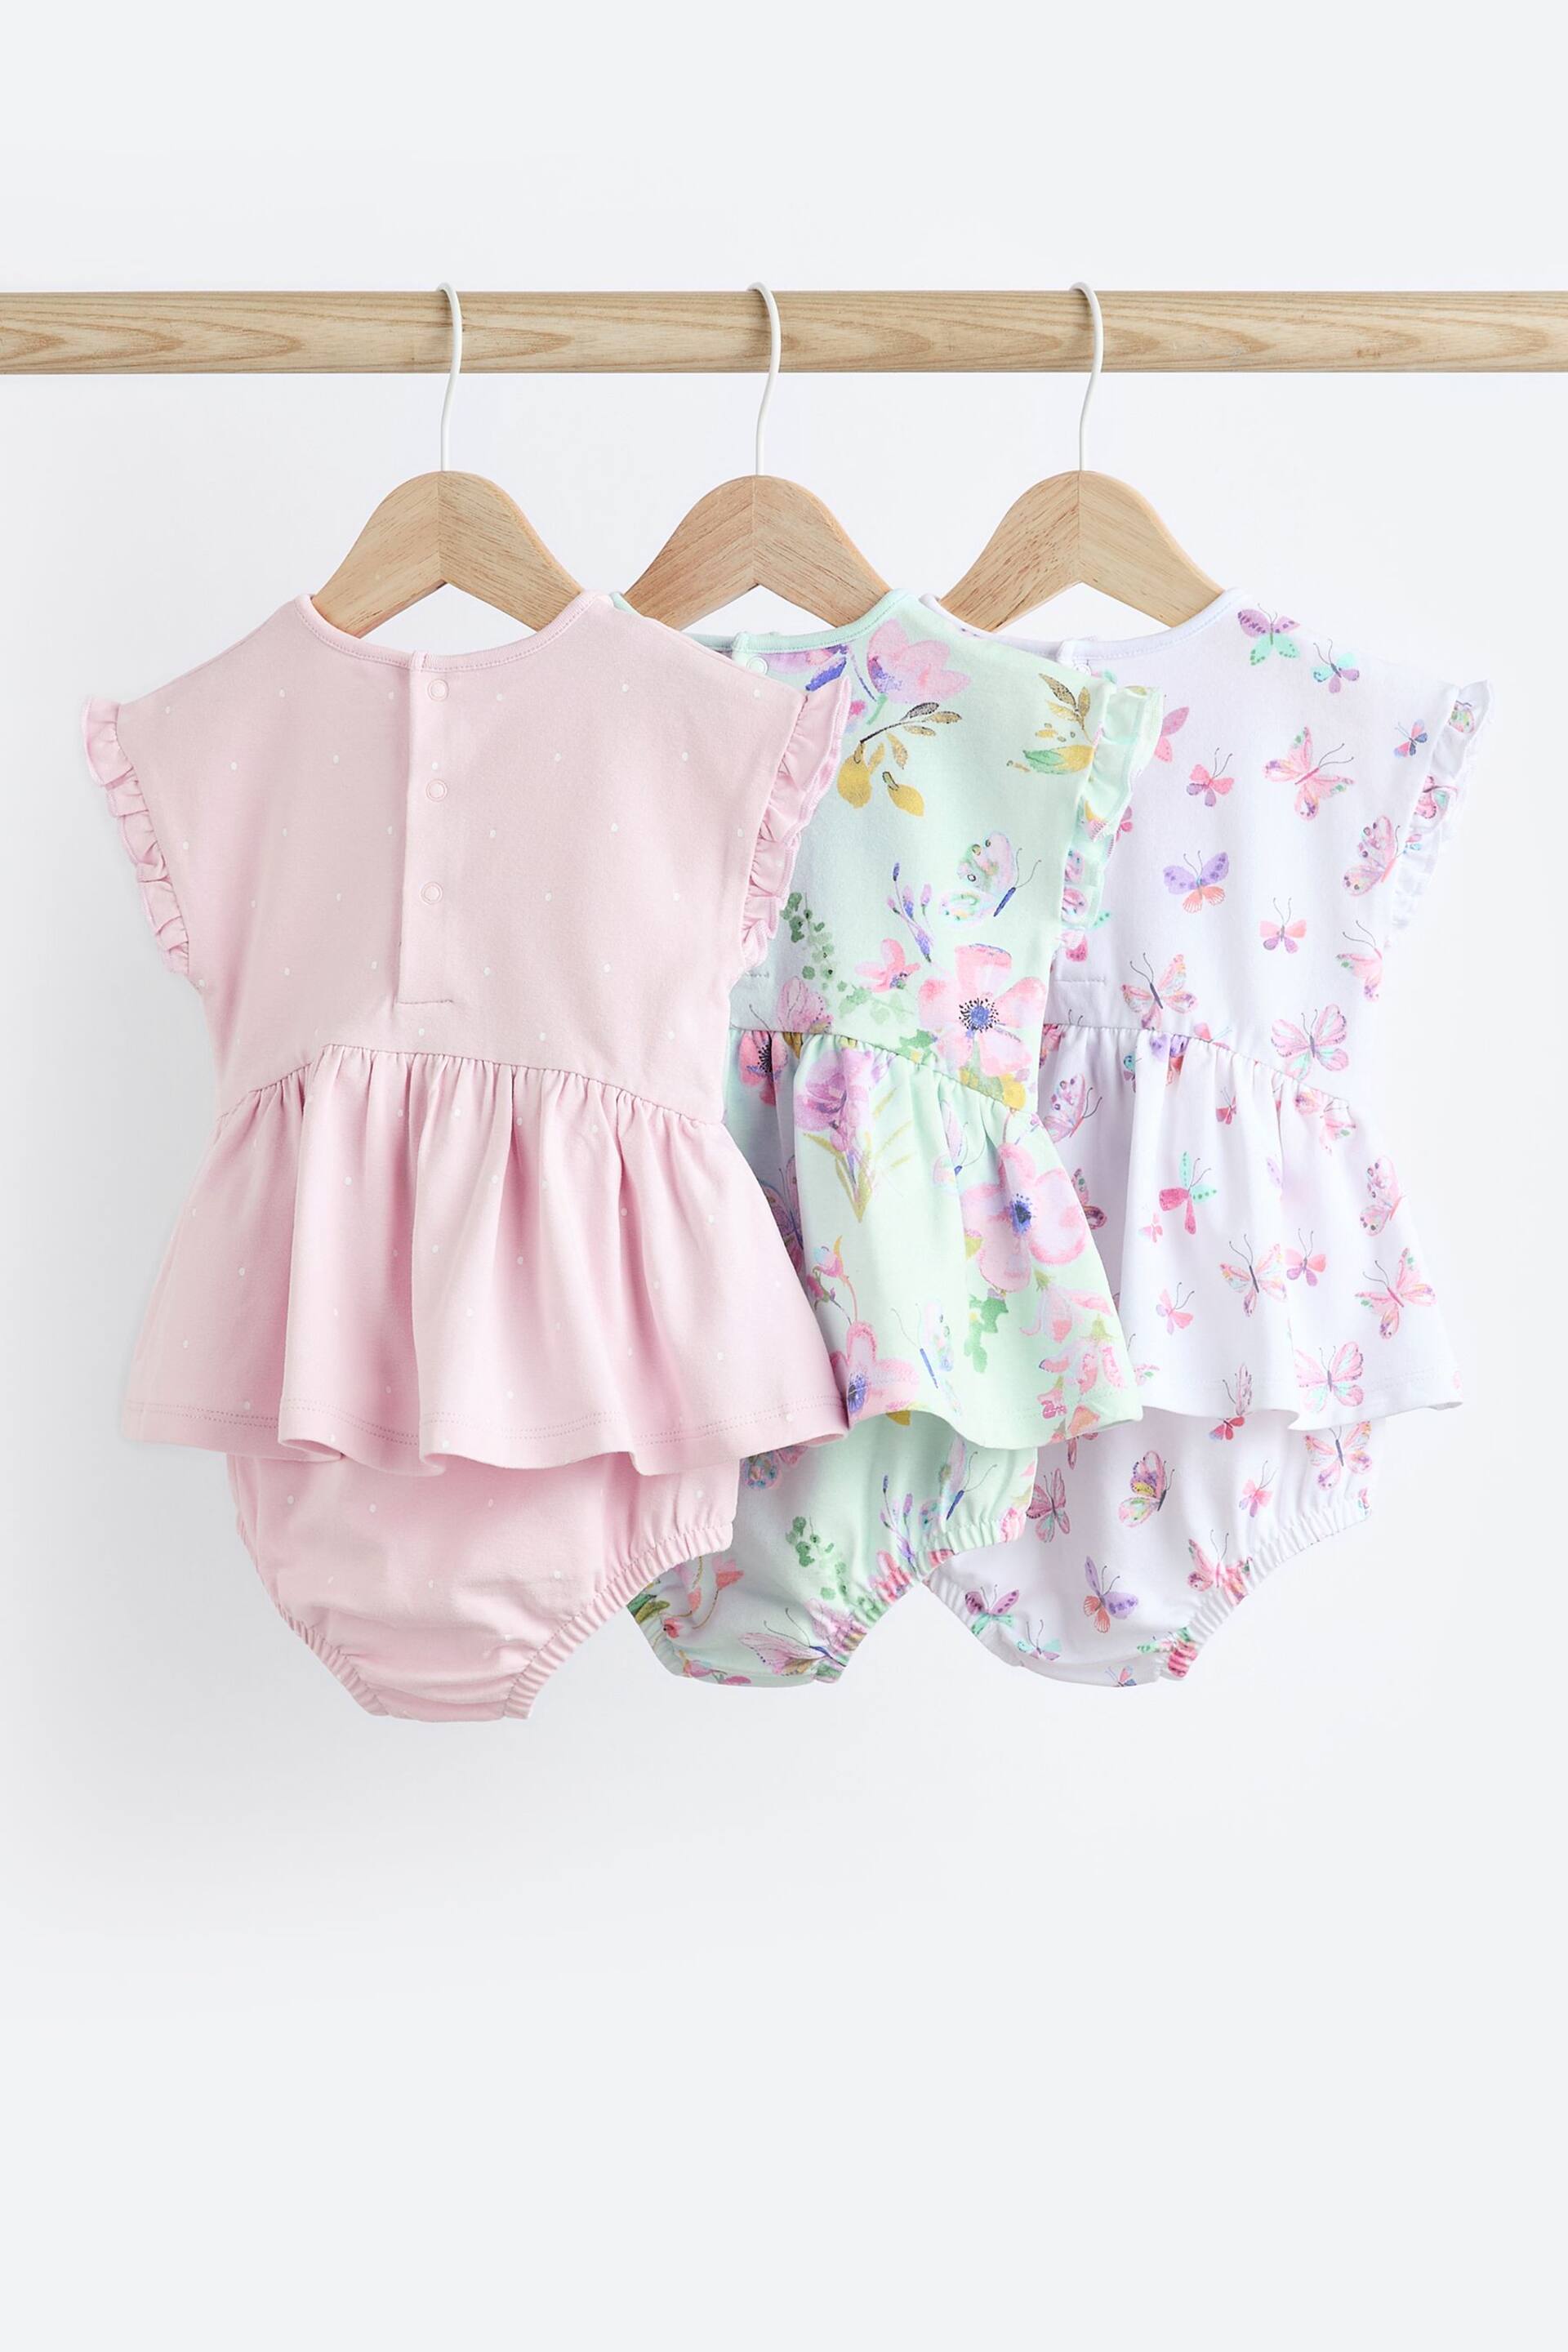 Pink Fairy Baby Skirted Romper 3 Pack - Image 2 of 7